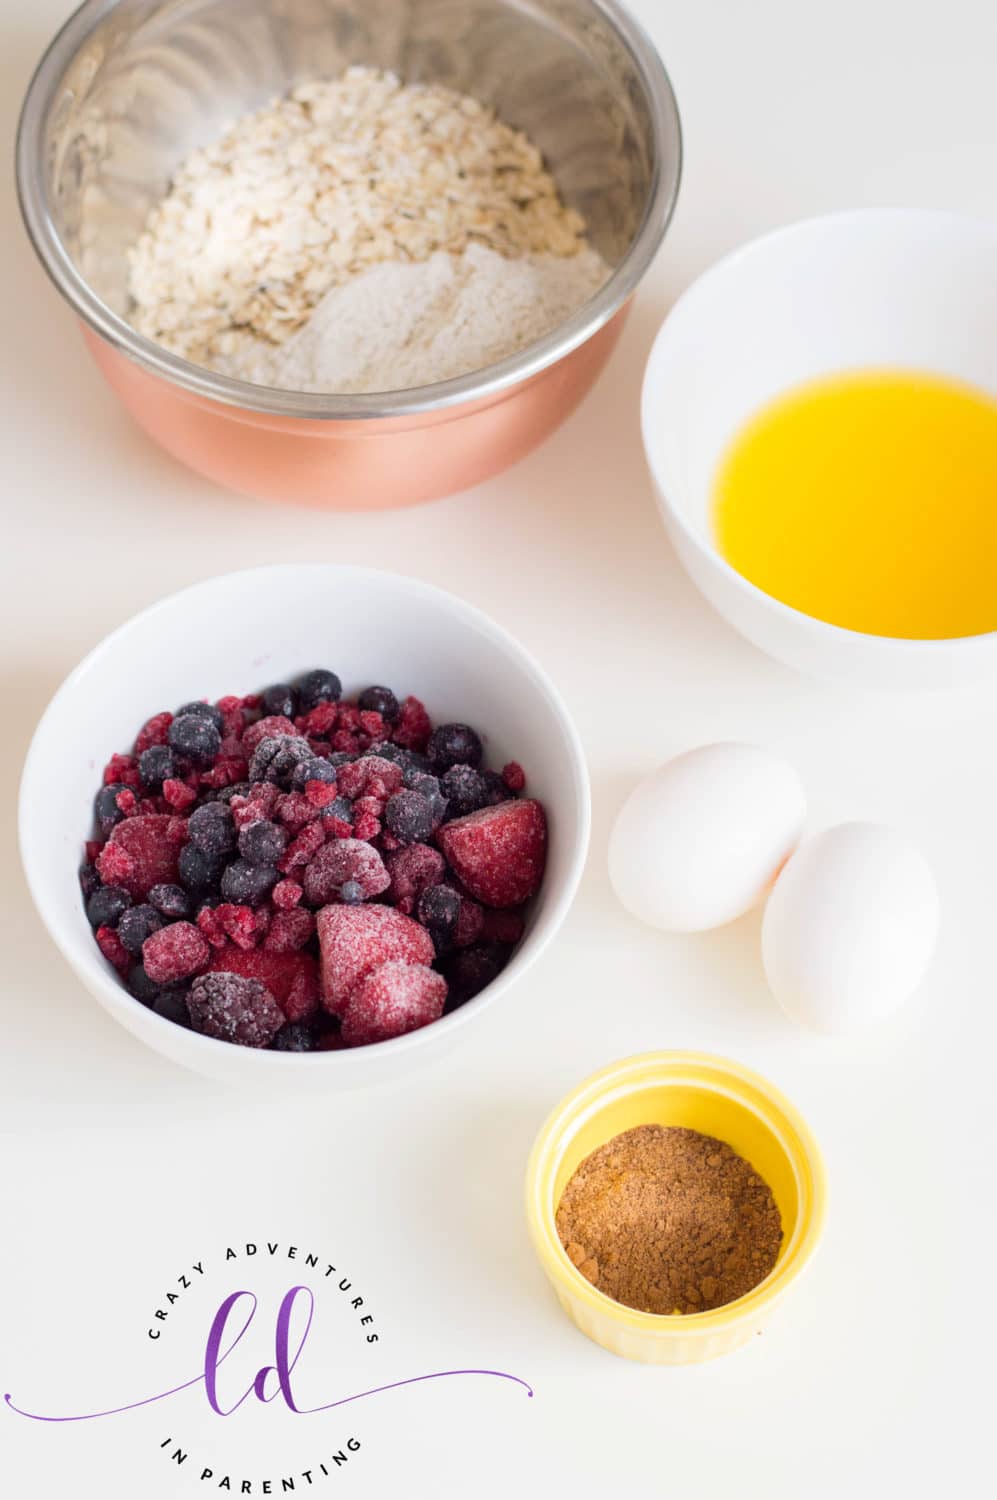 Ingredients Needed to Make Healthy Berry Muffins